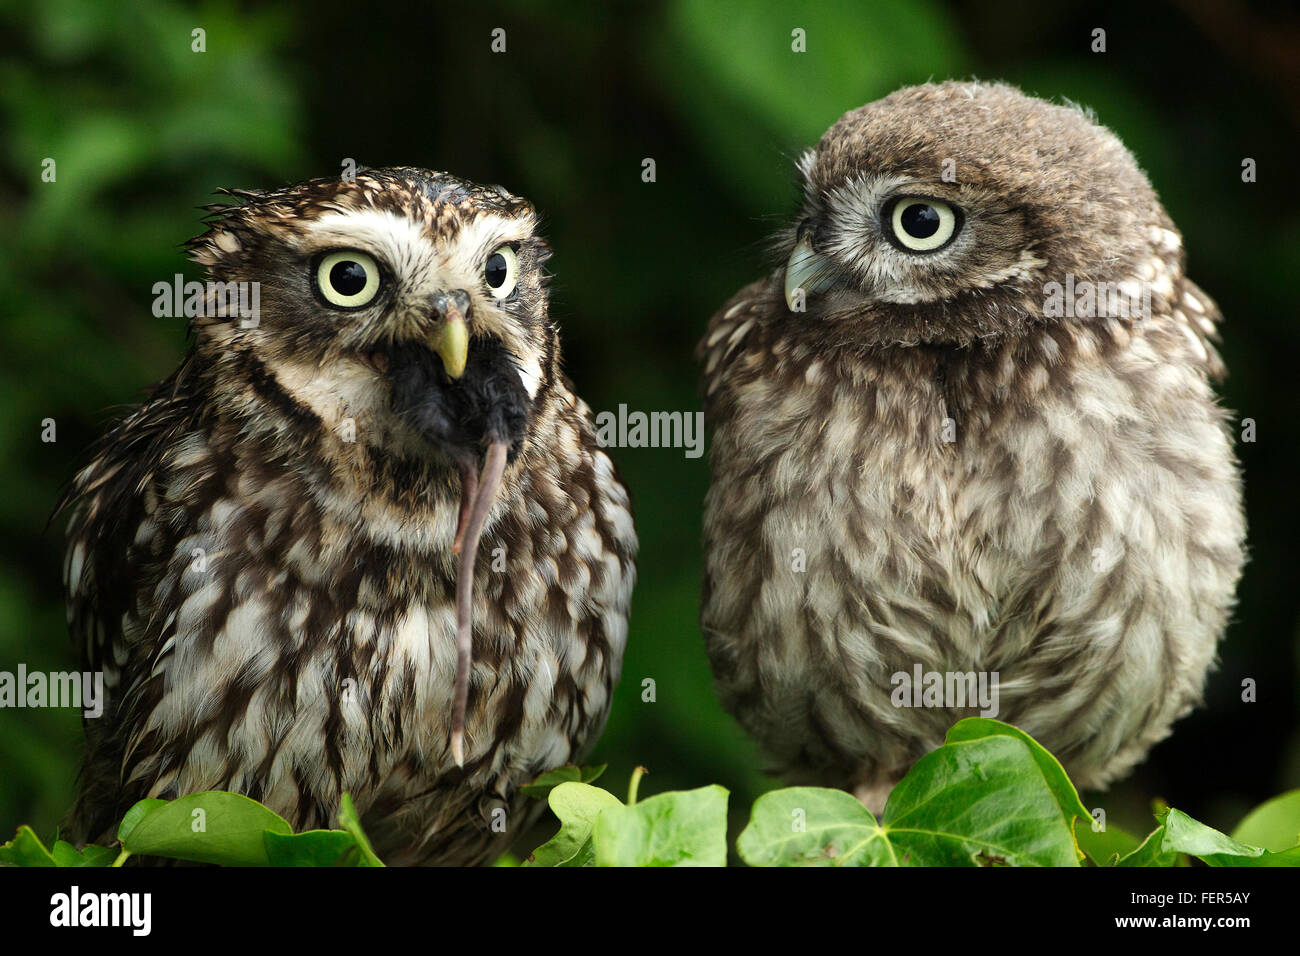 Funny animal photograph of a little owl (Athene Noctua) watching another with a rodent stuffed in its mouth Stock Photo